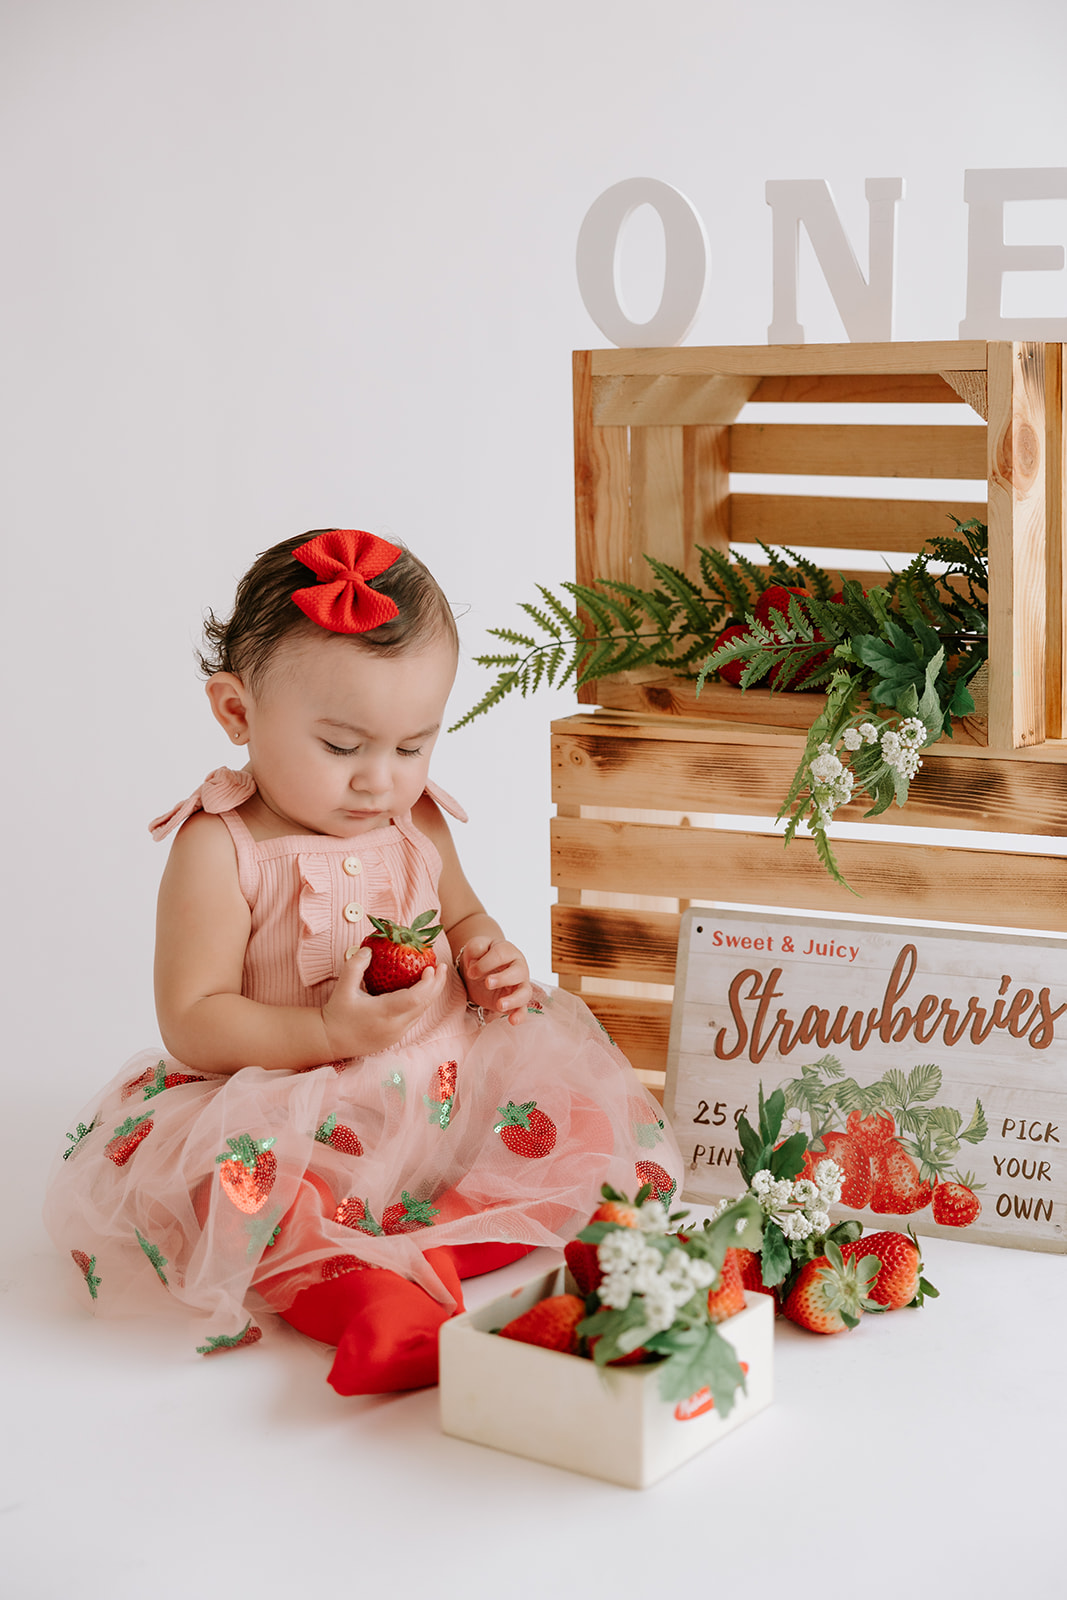 Strawberry-themed first birthday baby photoshoot in a natural light, white and bright, studio.